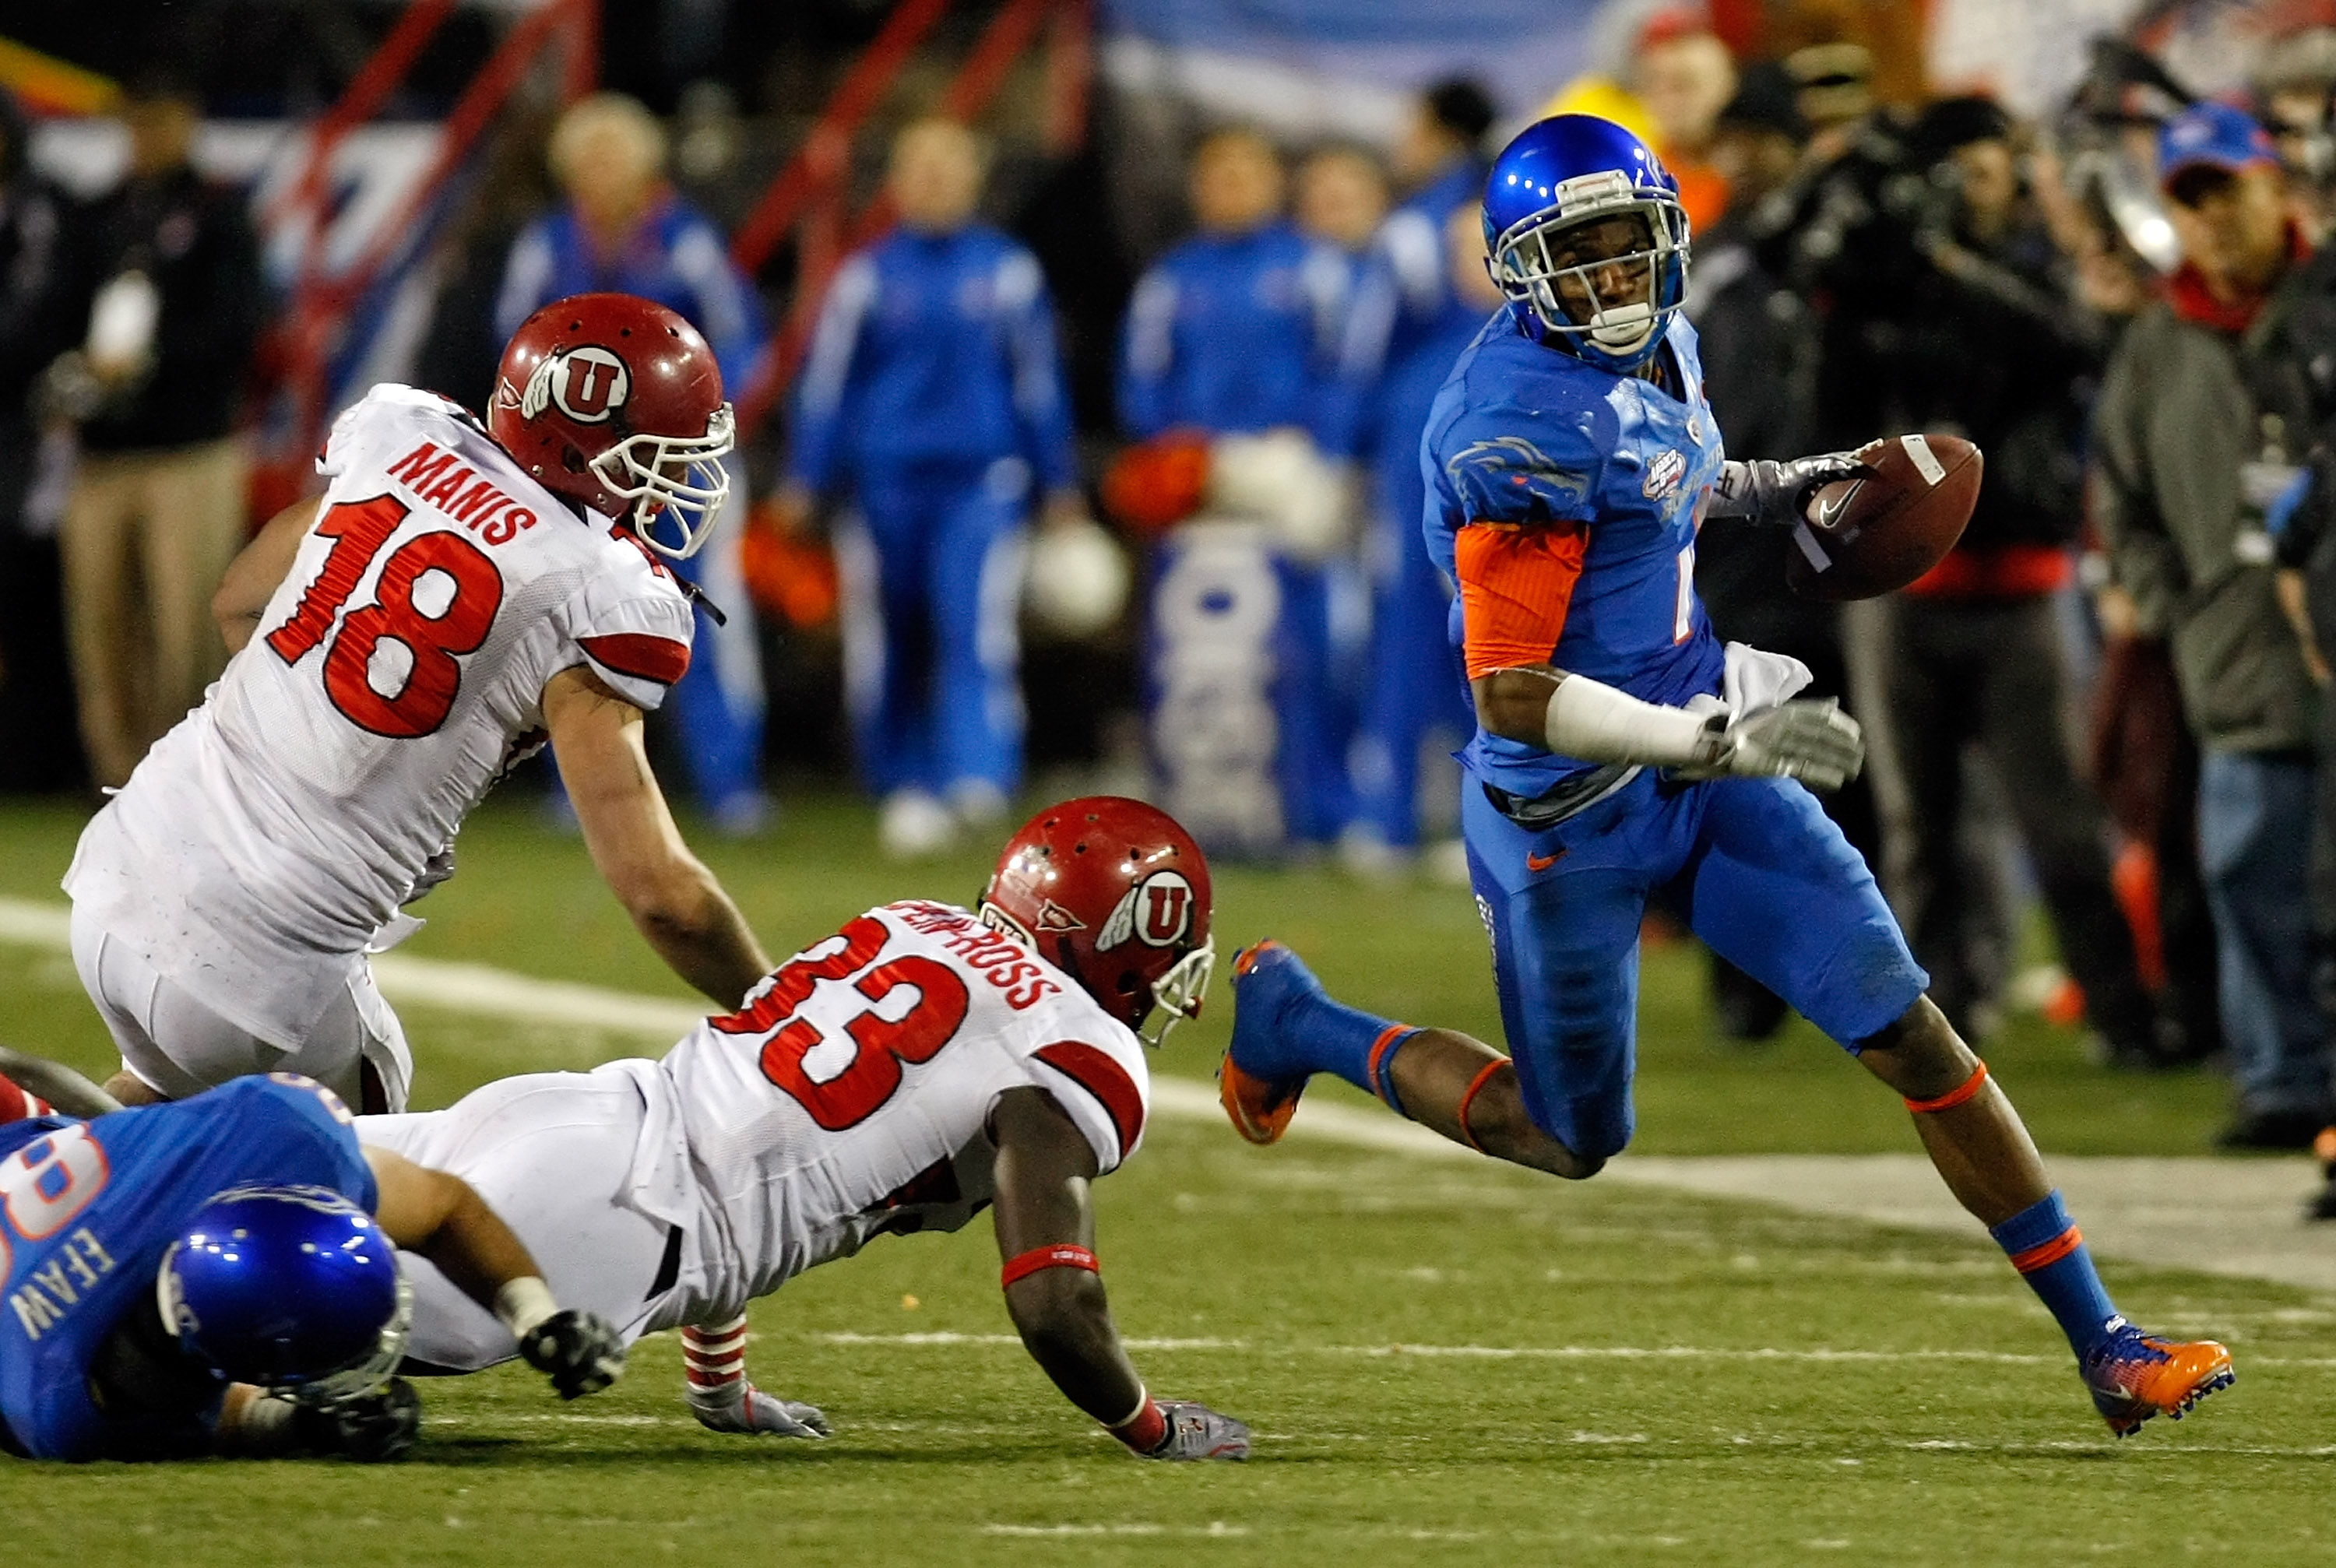 LAS VEGAS, NV - DECEMBER 22:  Titus Young #1 of the Boise State Broncos runs for yardage around Chad Manis #18 and Justin Taplin-Ross #33 of the Utah Utes during the MAACO Bowl Las Vegas at Sam Boyd Stadium December 22, 2010 in Las Vegas, Nevada. Boise St